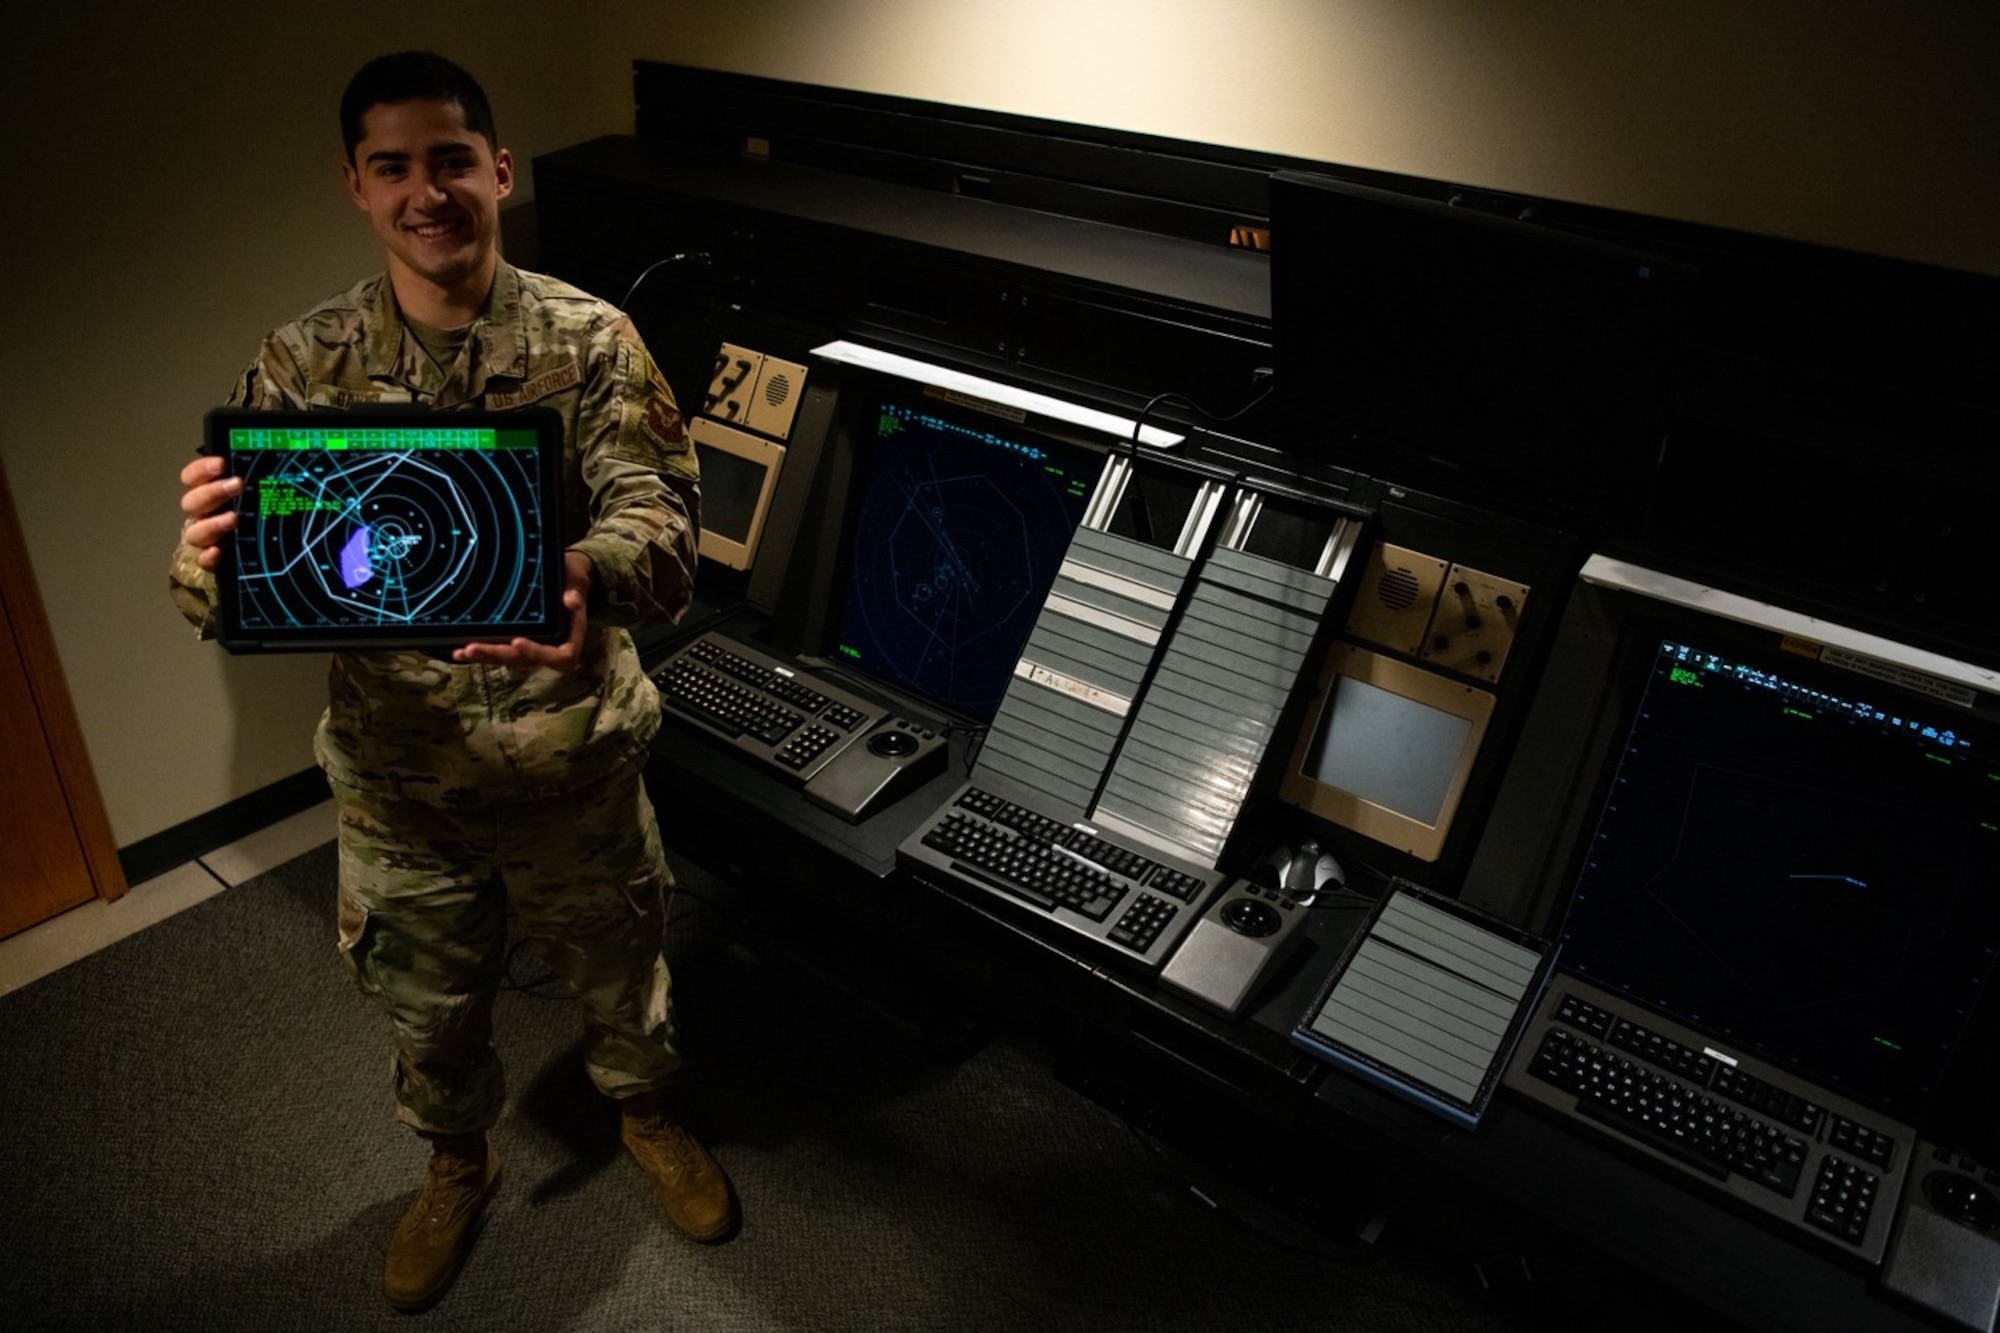 Senior Airman Christopher Daniel, a 28th Operation Support Squadron air traffic control (ATC) trainer, displays the new cloud-based training system in front of the old ATC training simulators at Ellsworth Air Force Base, S.D., April 15, 2021